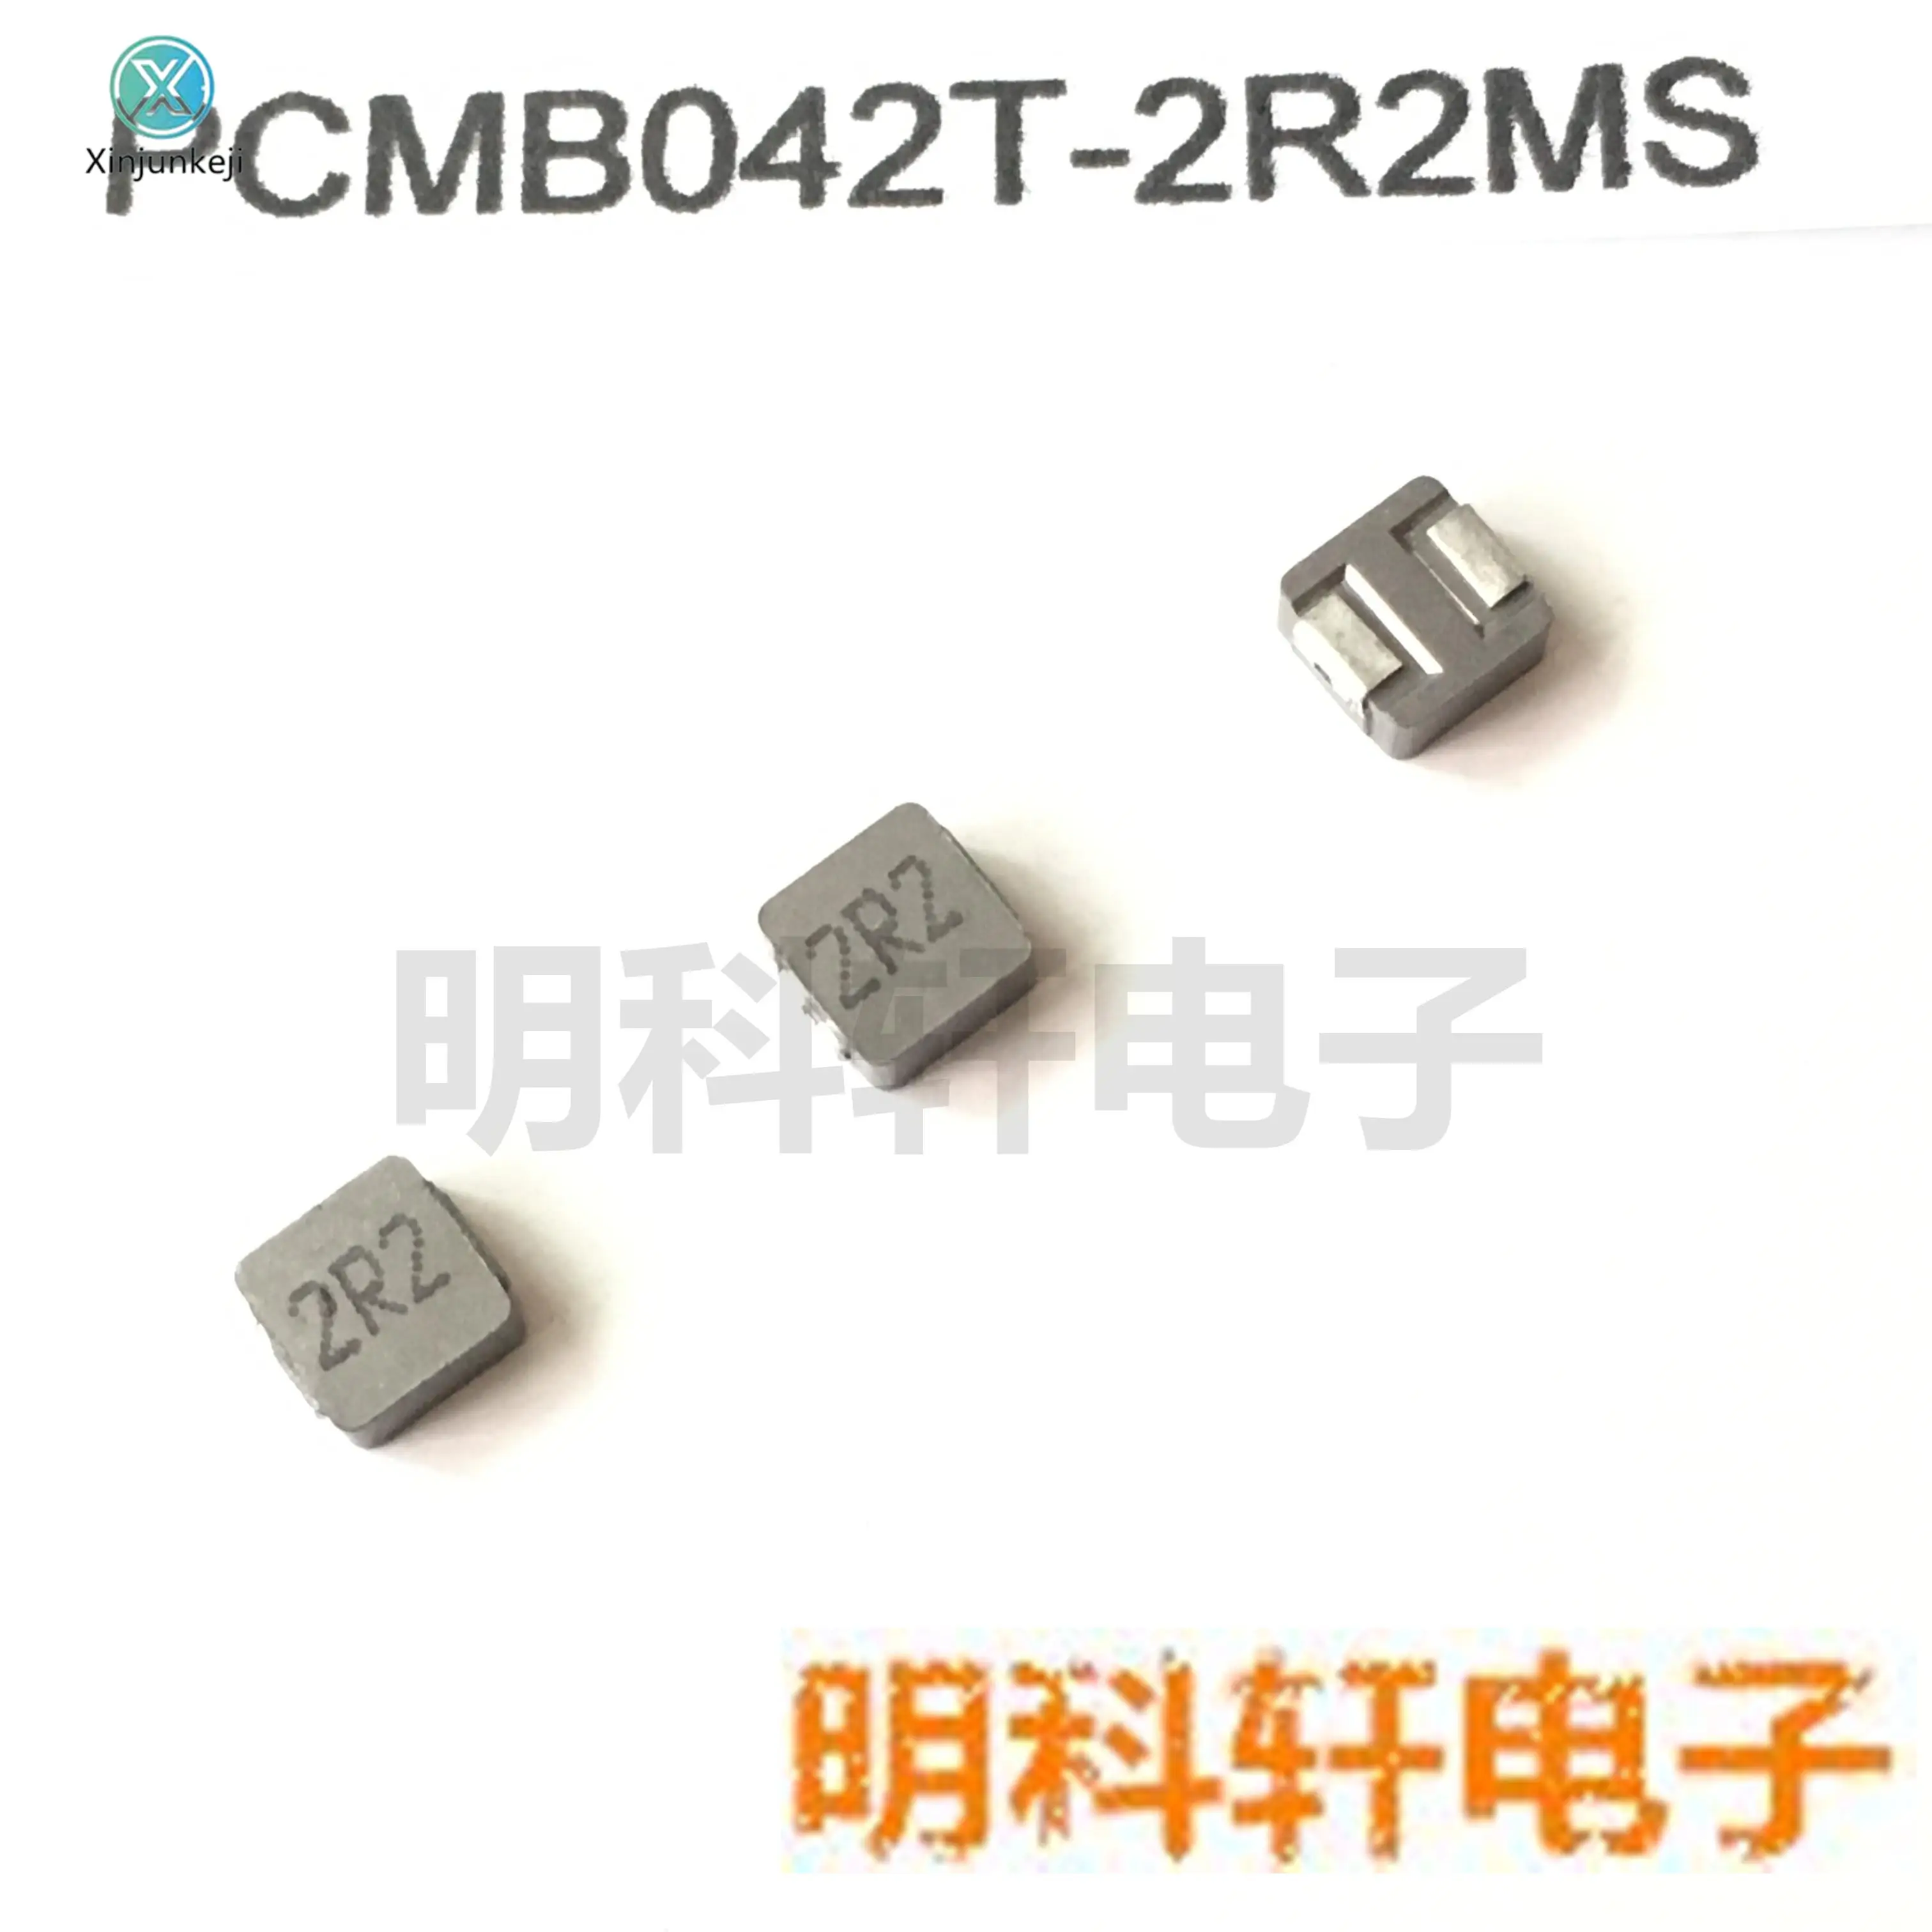 

20pcs orginal new PCMB042T-2R2MS SMD integrated molding inductor 4*4*2 2.2UH